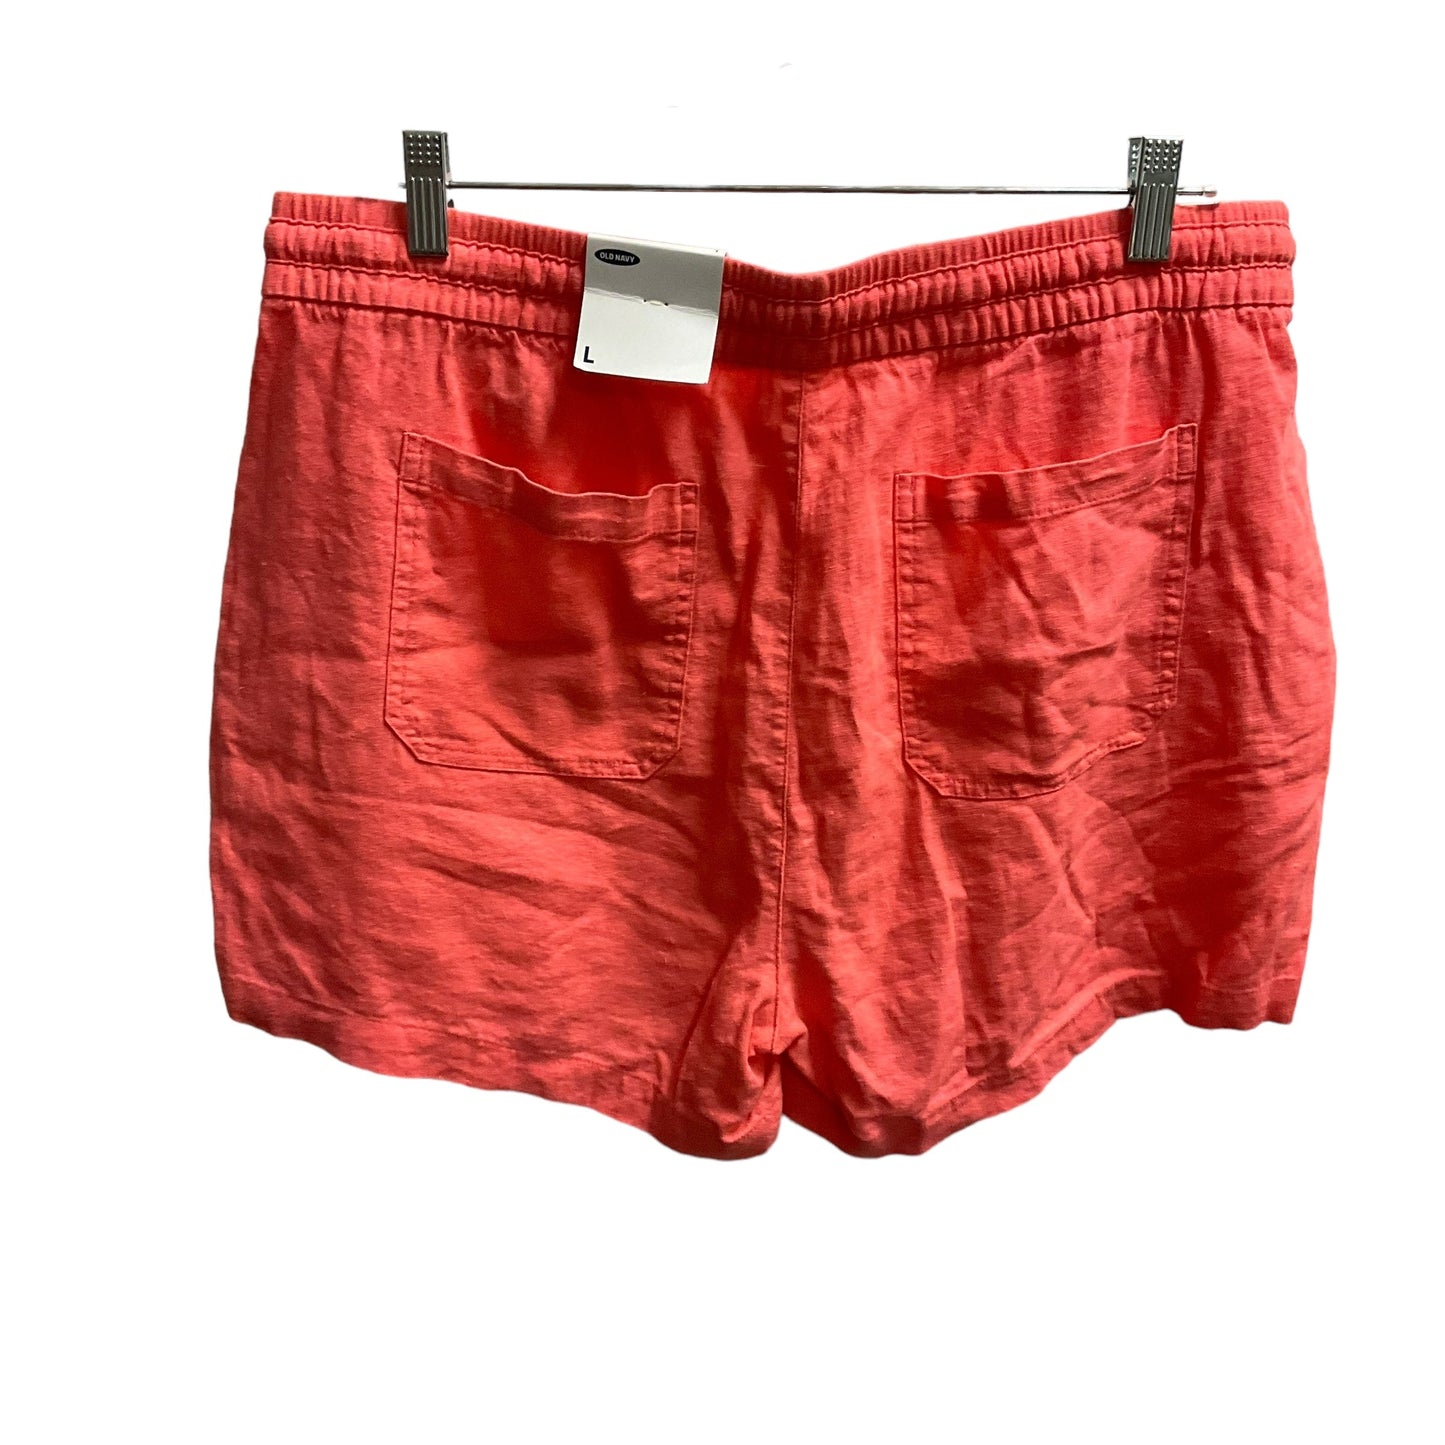 Coral Shorts Old Navy, Size L